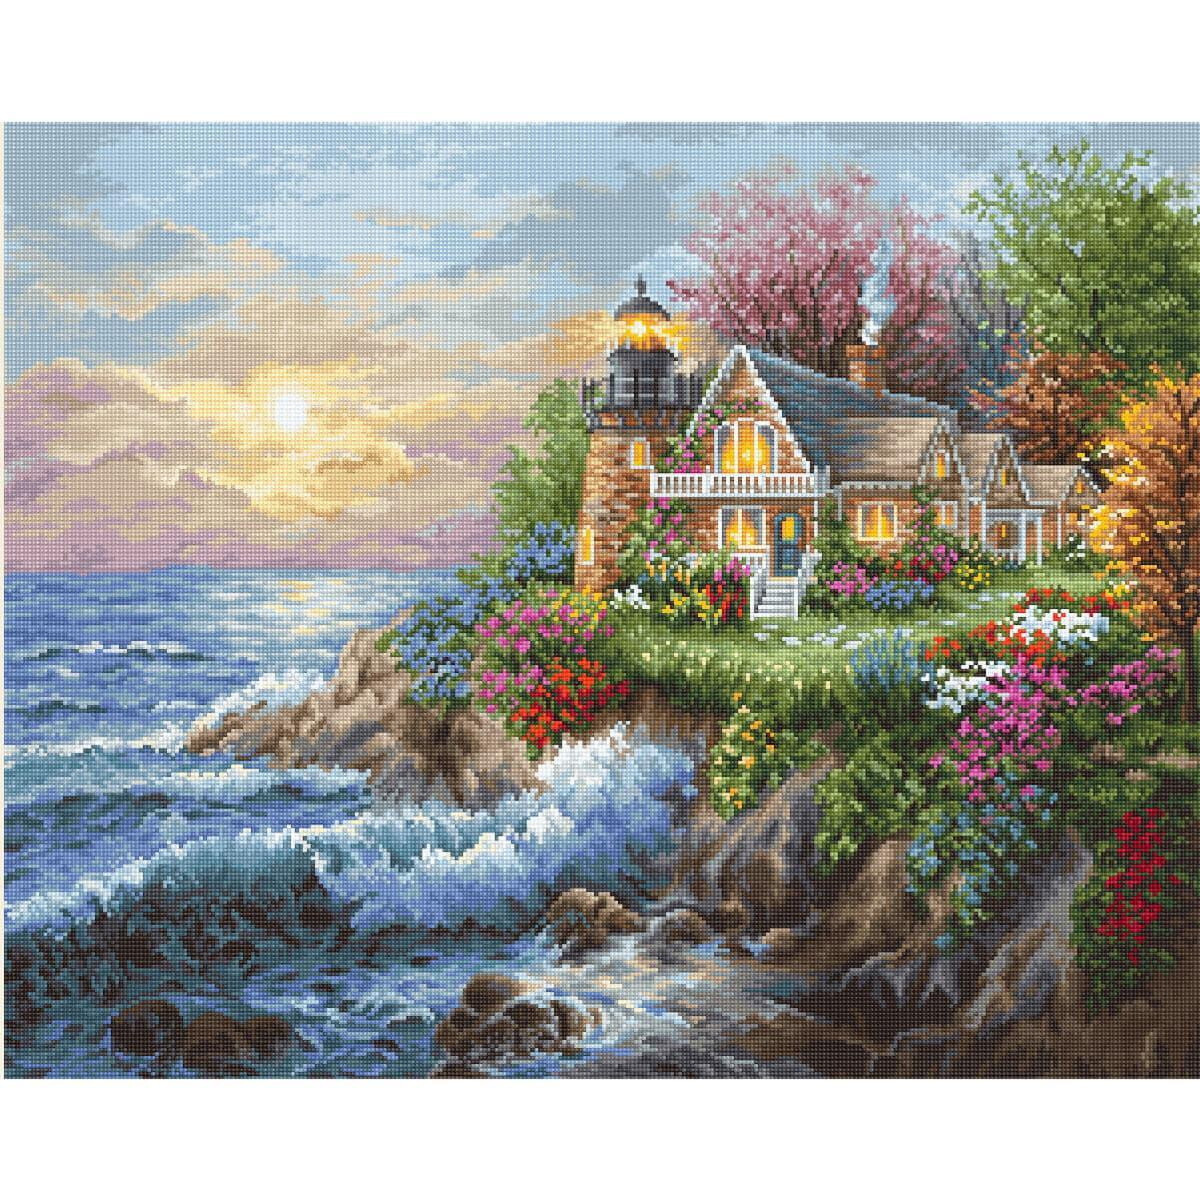 The picture shows a little house by the sea with a...